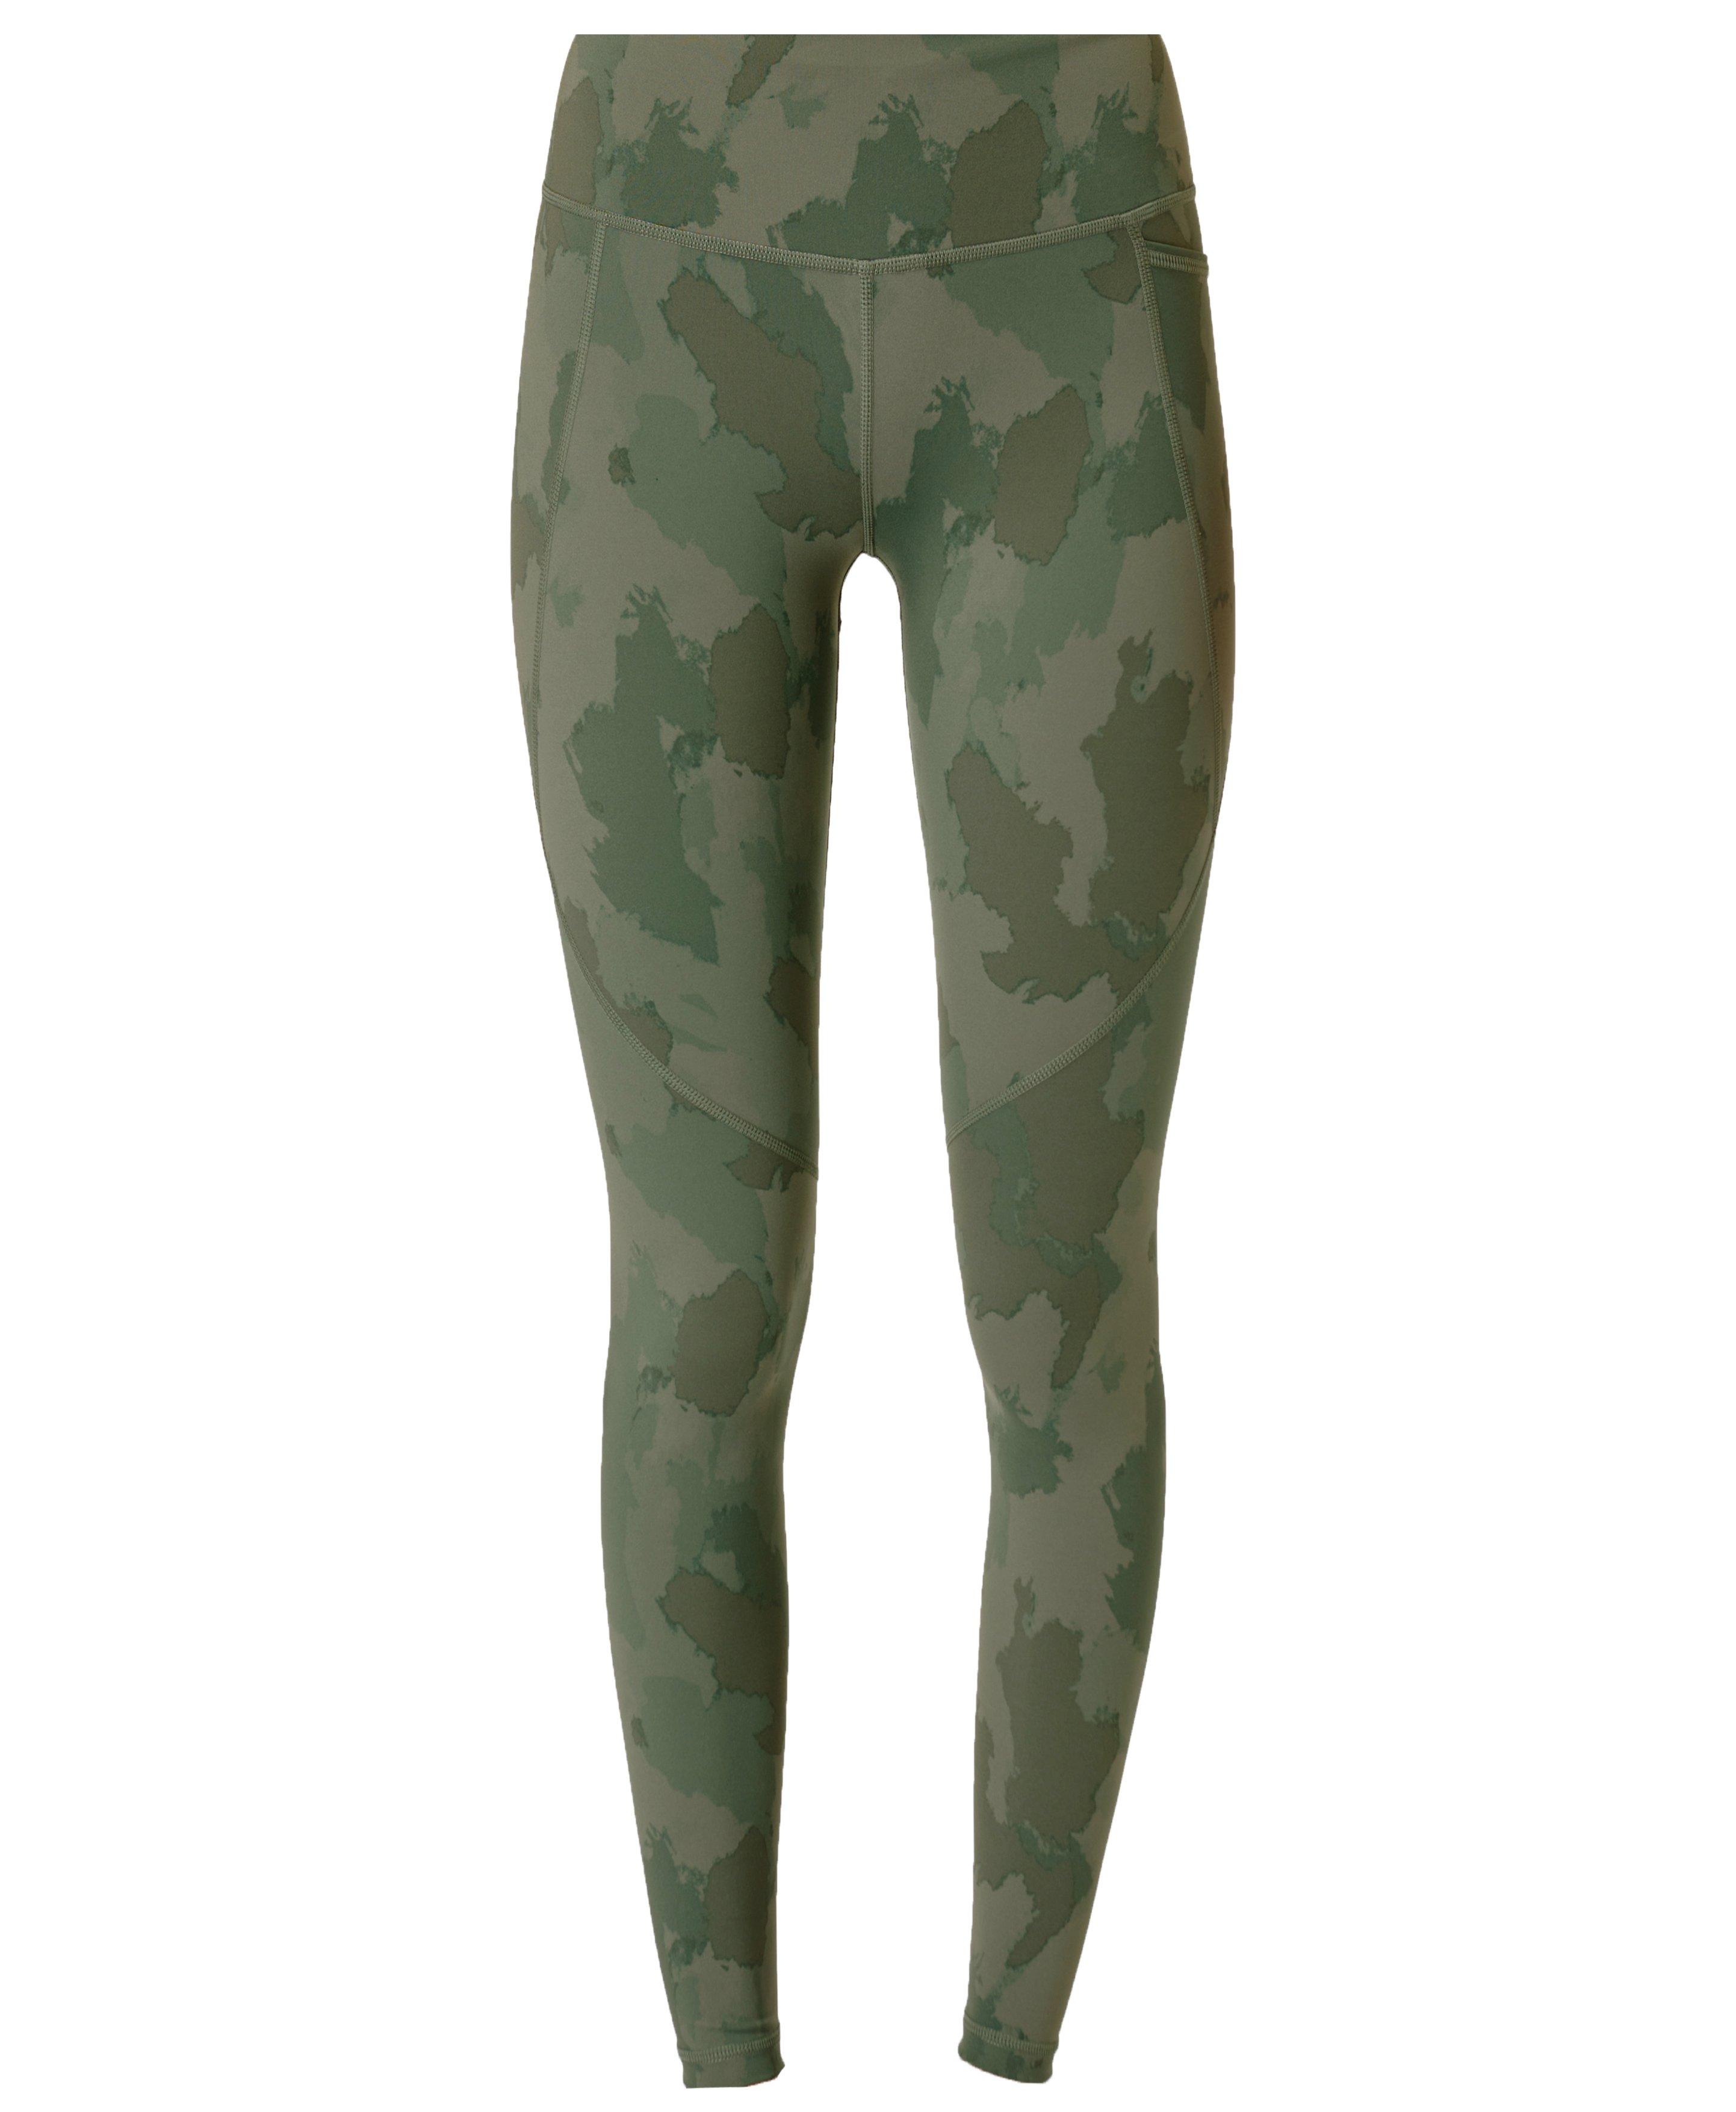 Power Workout Leggings - Green Painted Camo Print